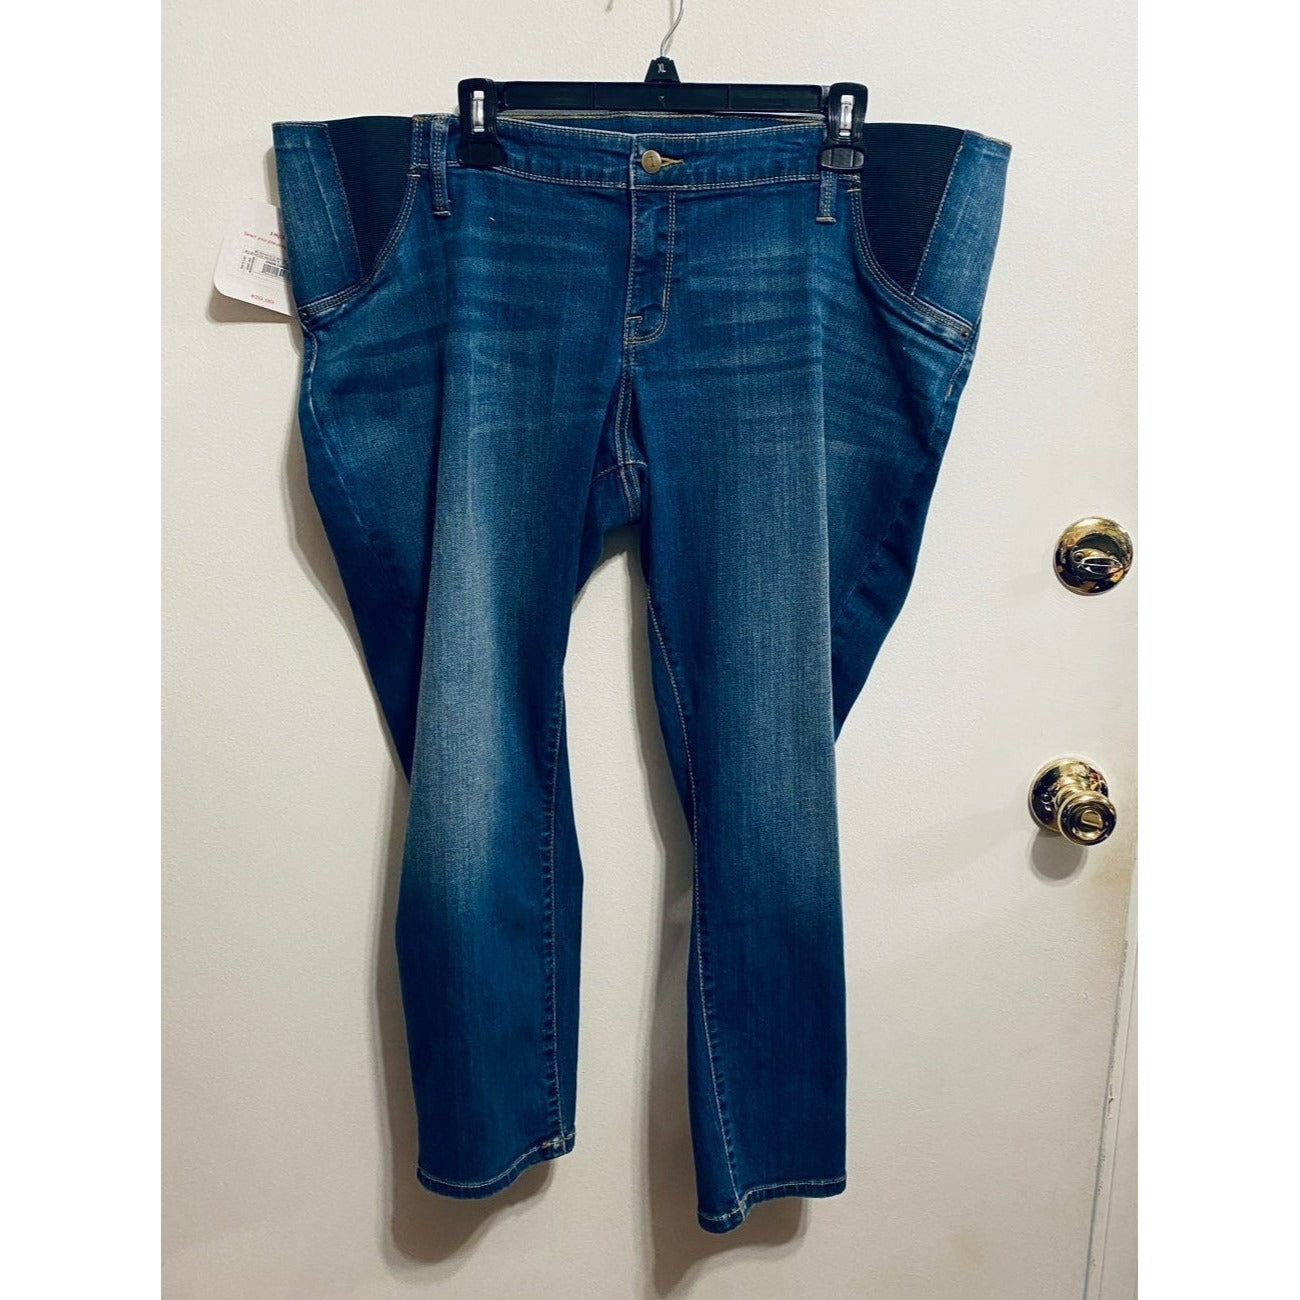 New Size 18 maternity skinny cropped jeans